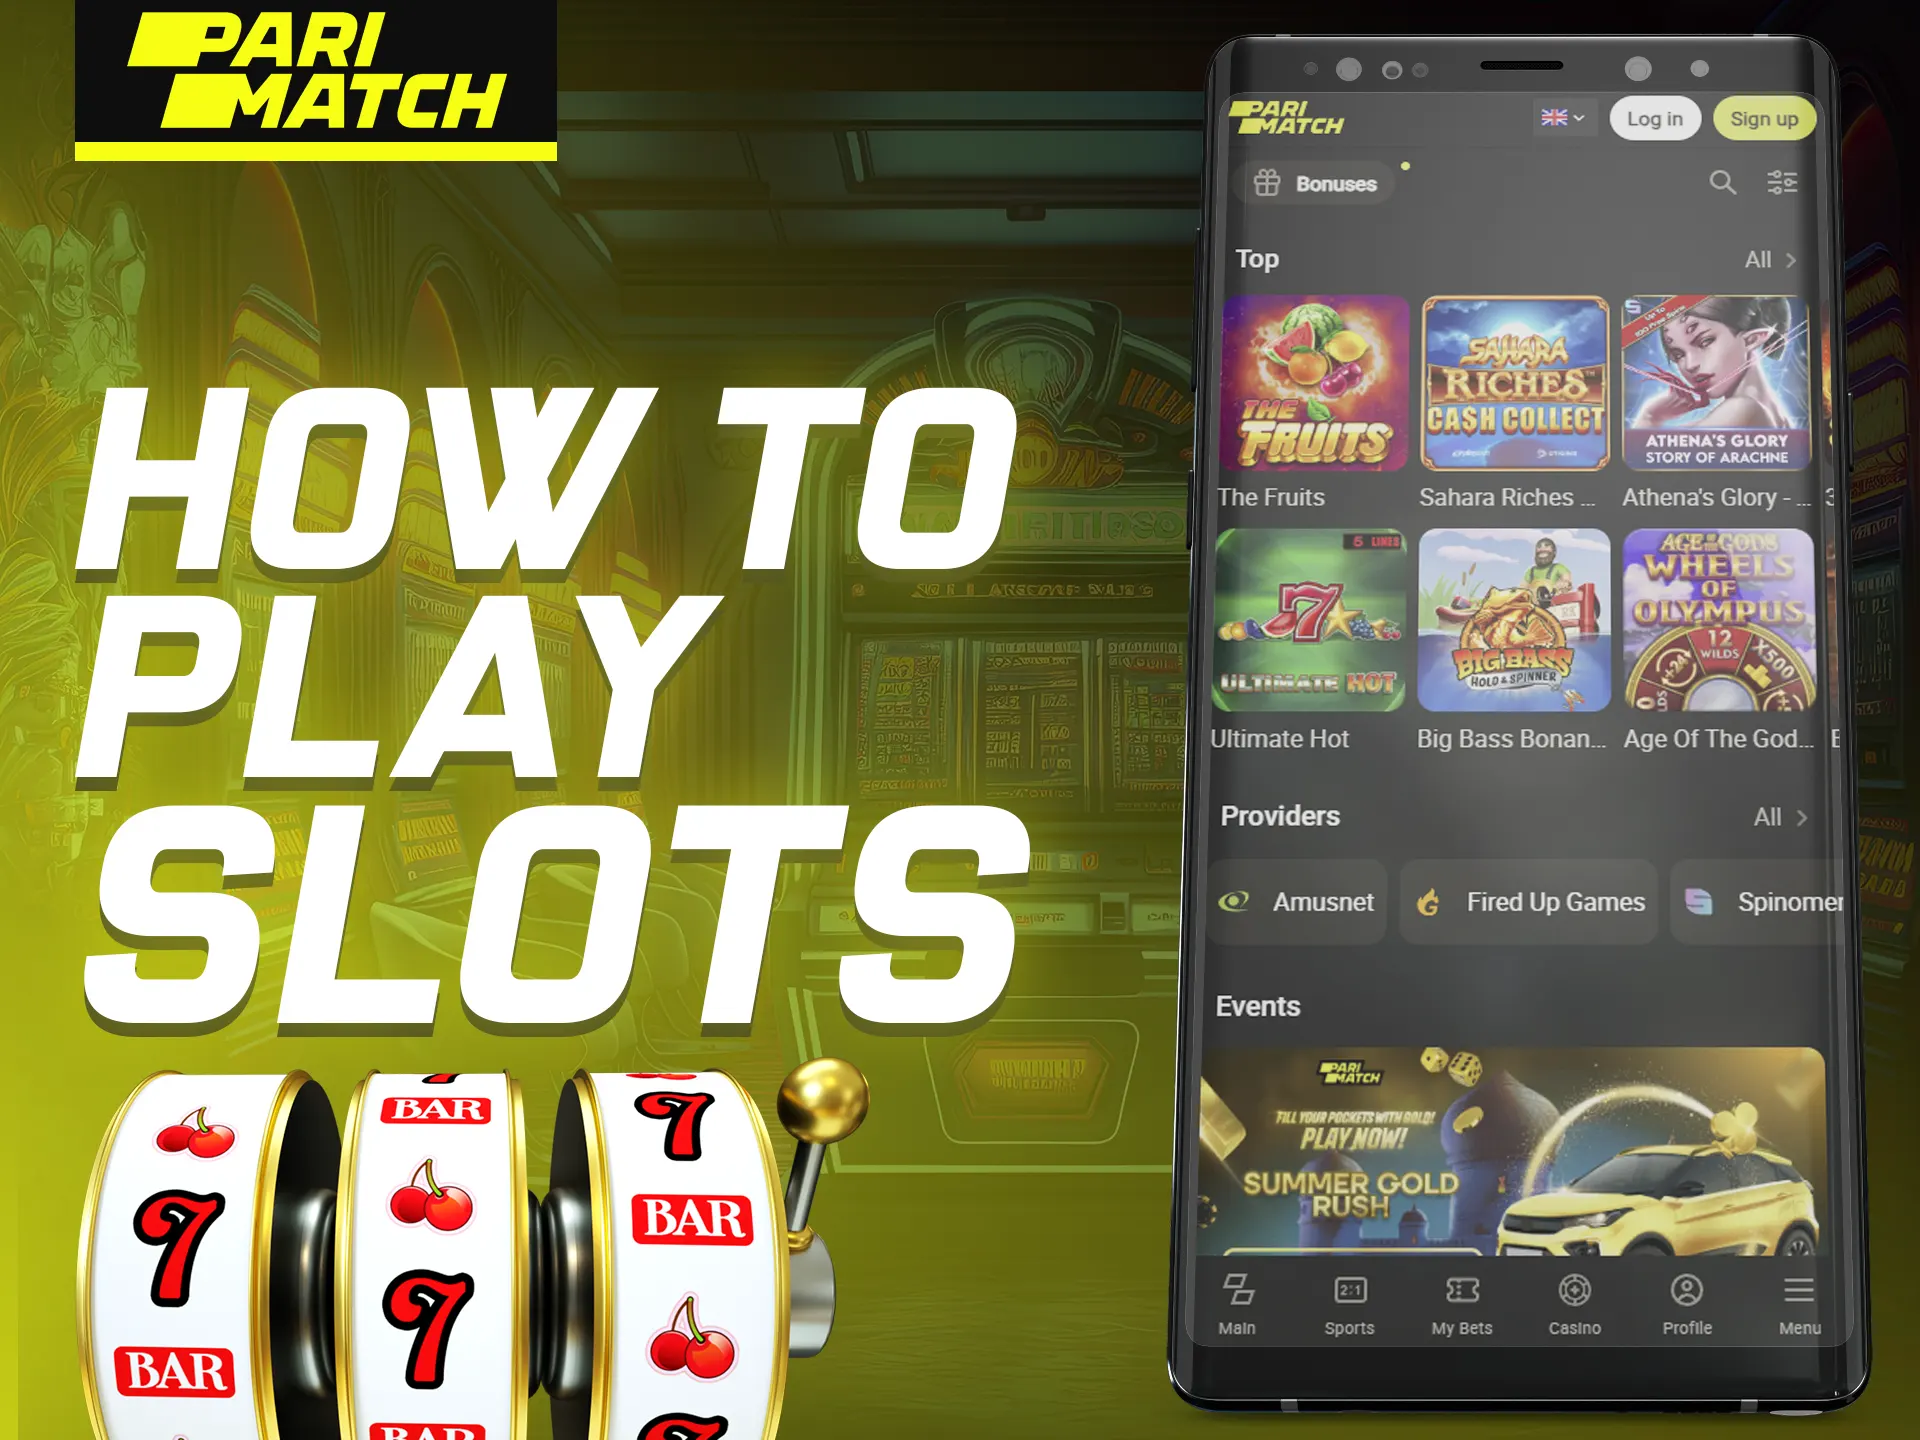 Follow the instructions and play slots at Parimatch.